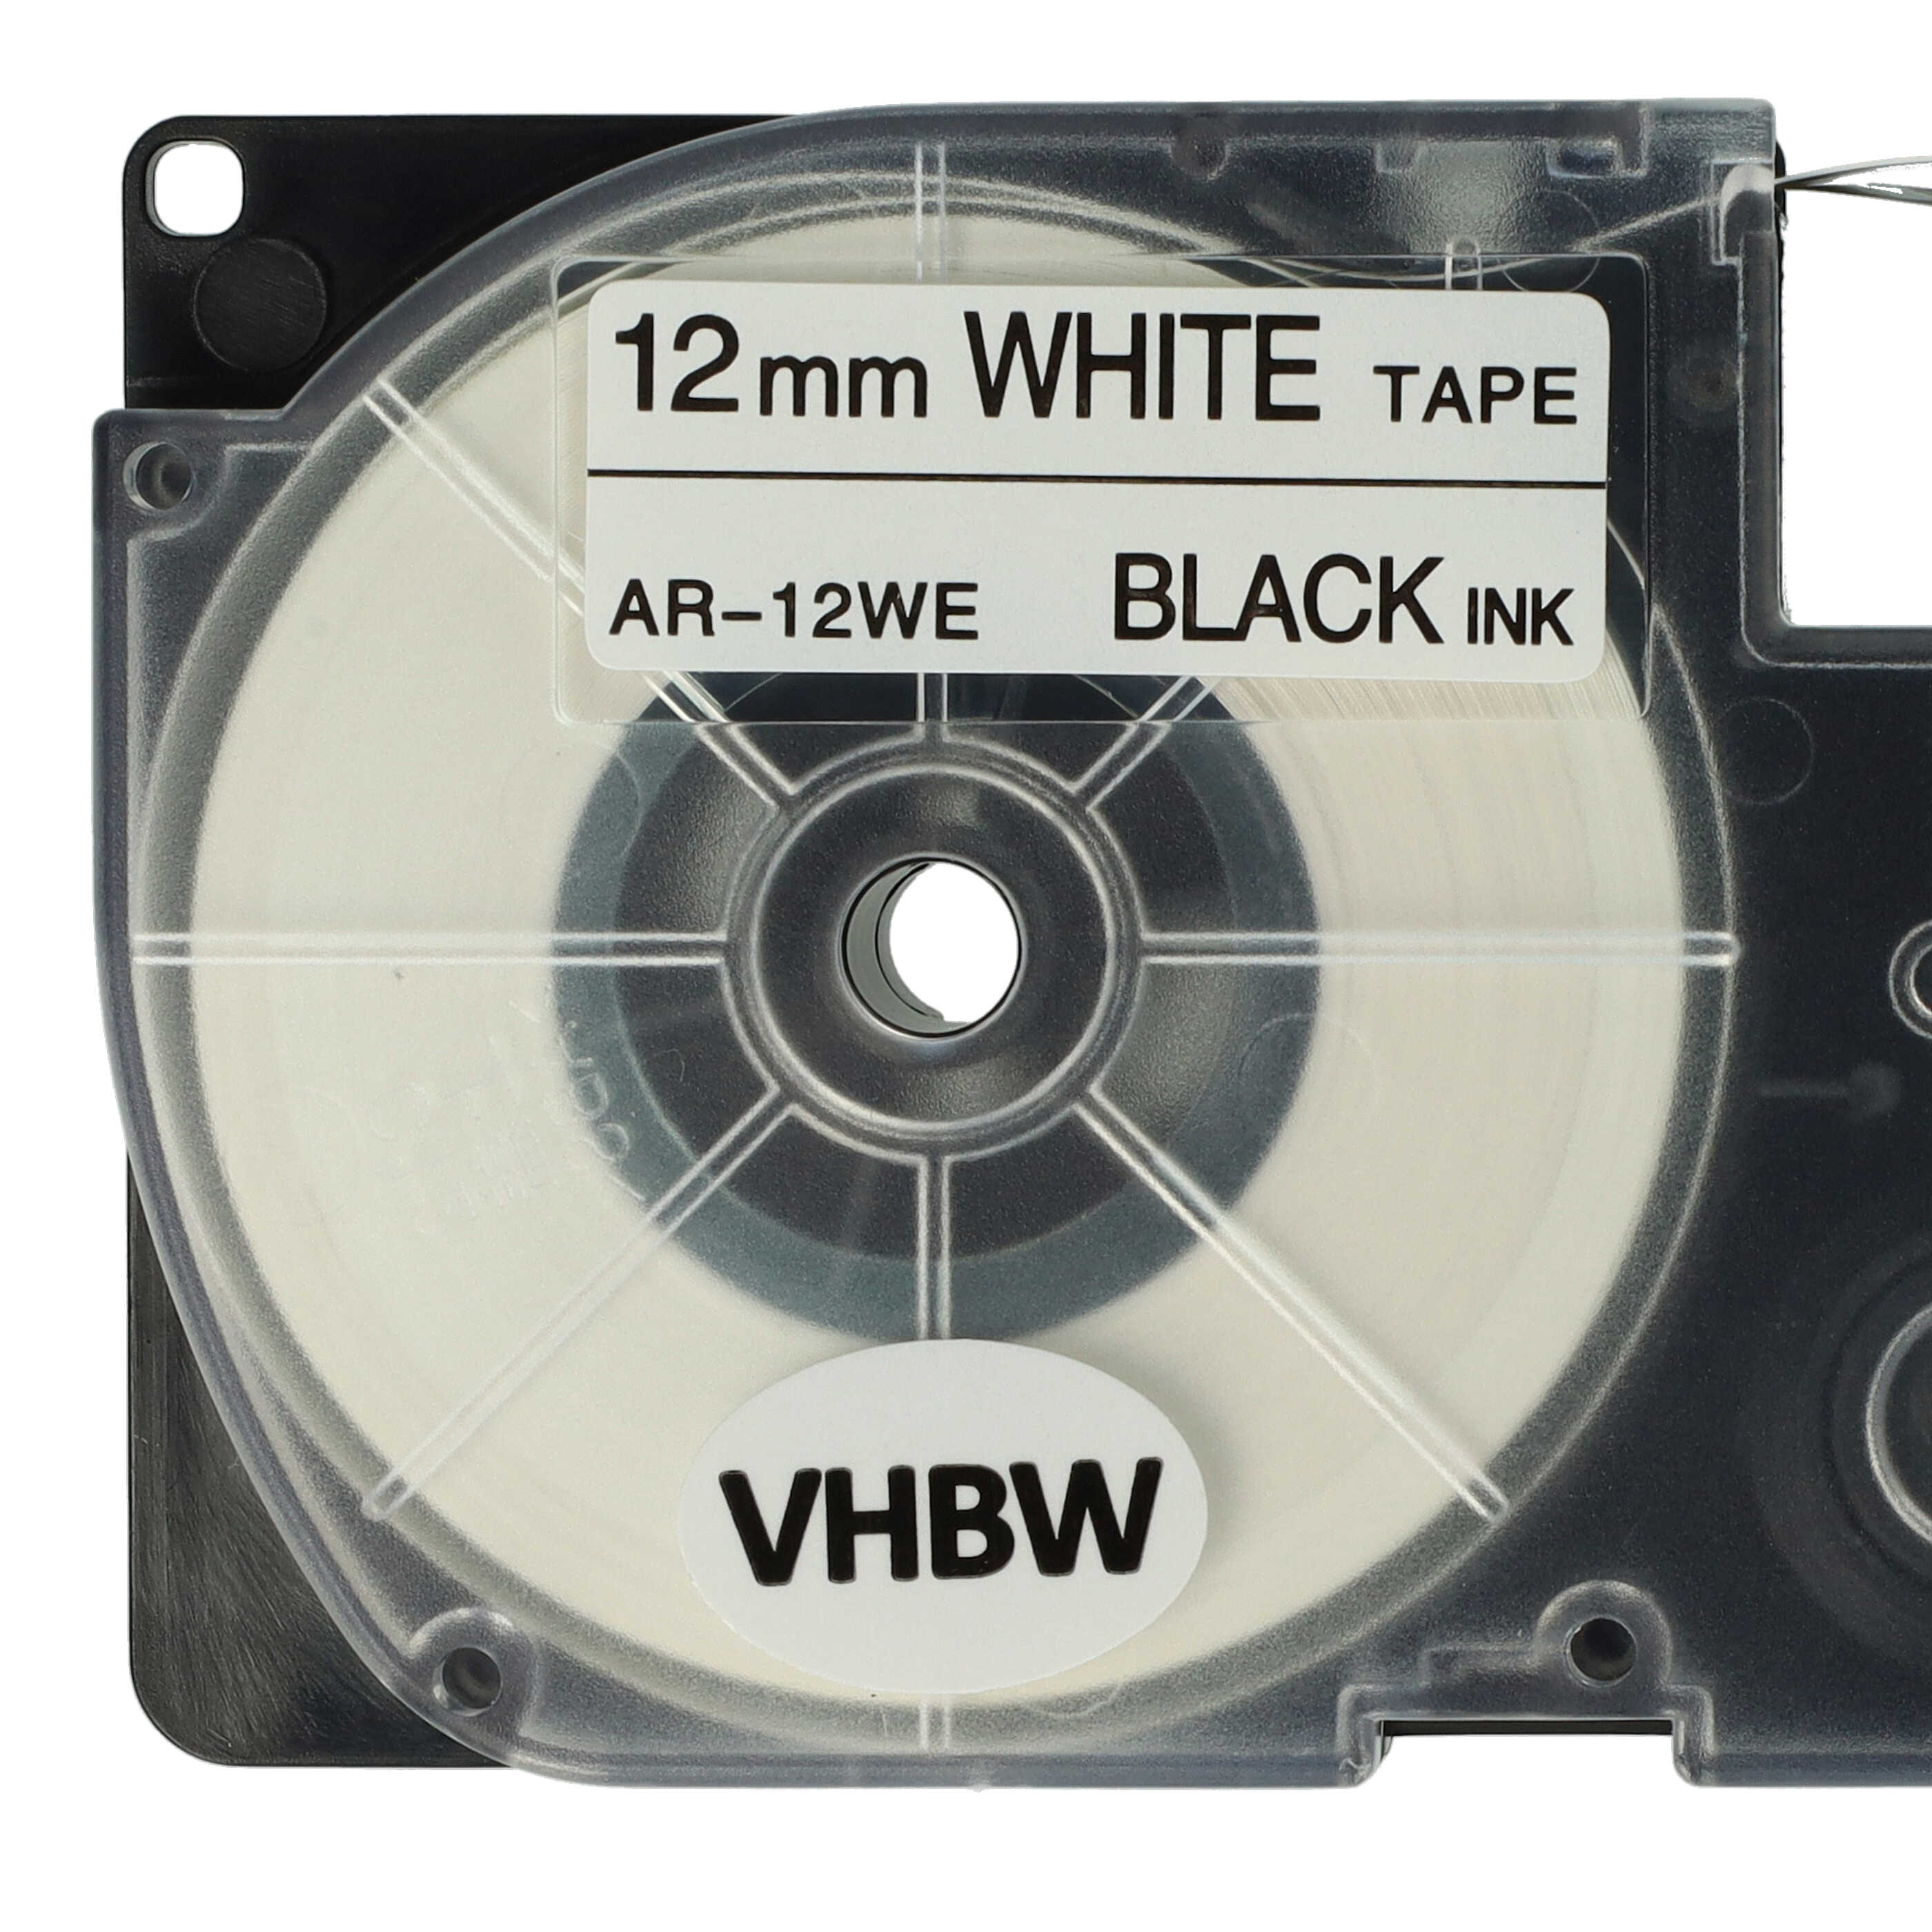 10x Label Tape as Replacement for Casio XR-12WE, XR-12WE1 - 12 mm Black to White